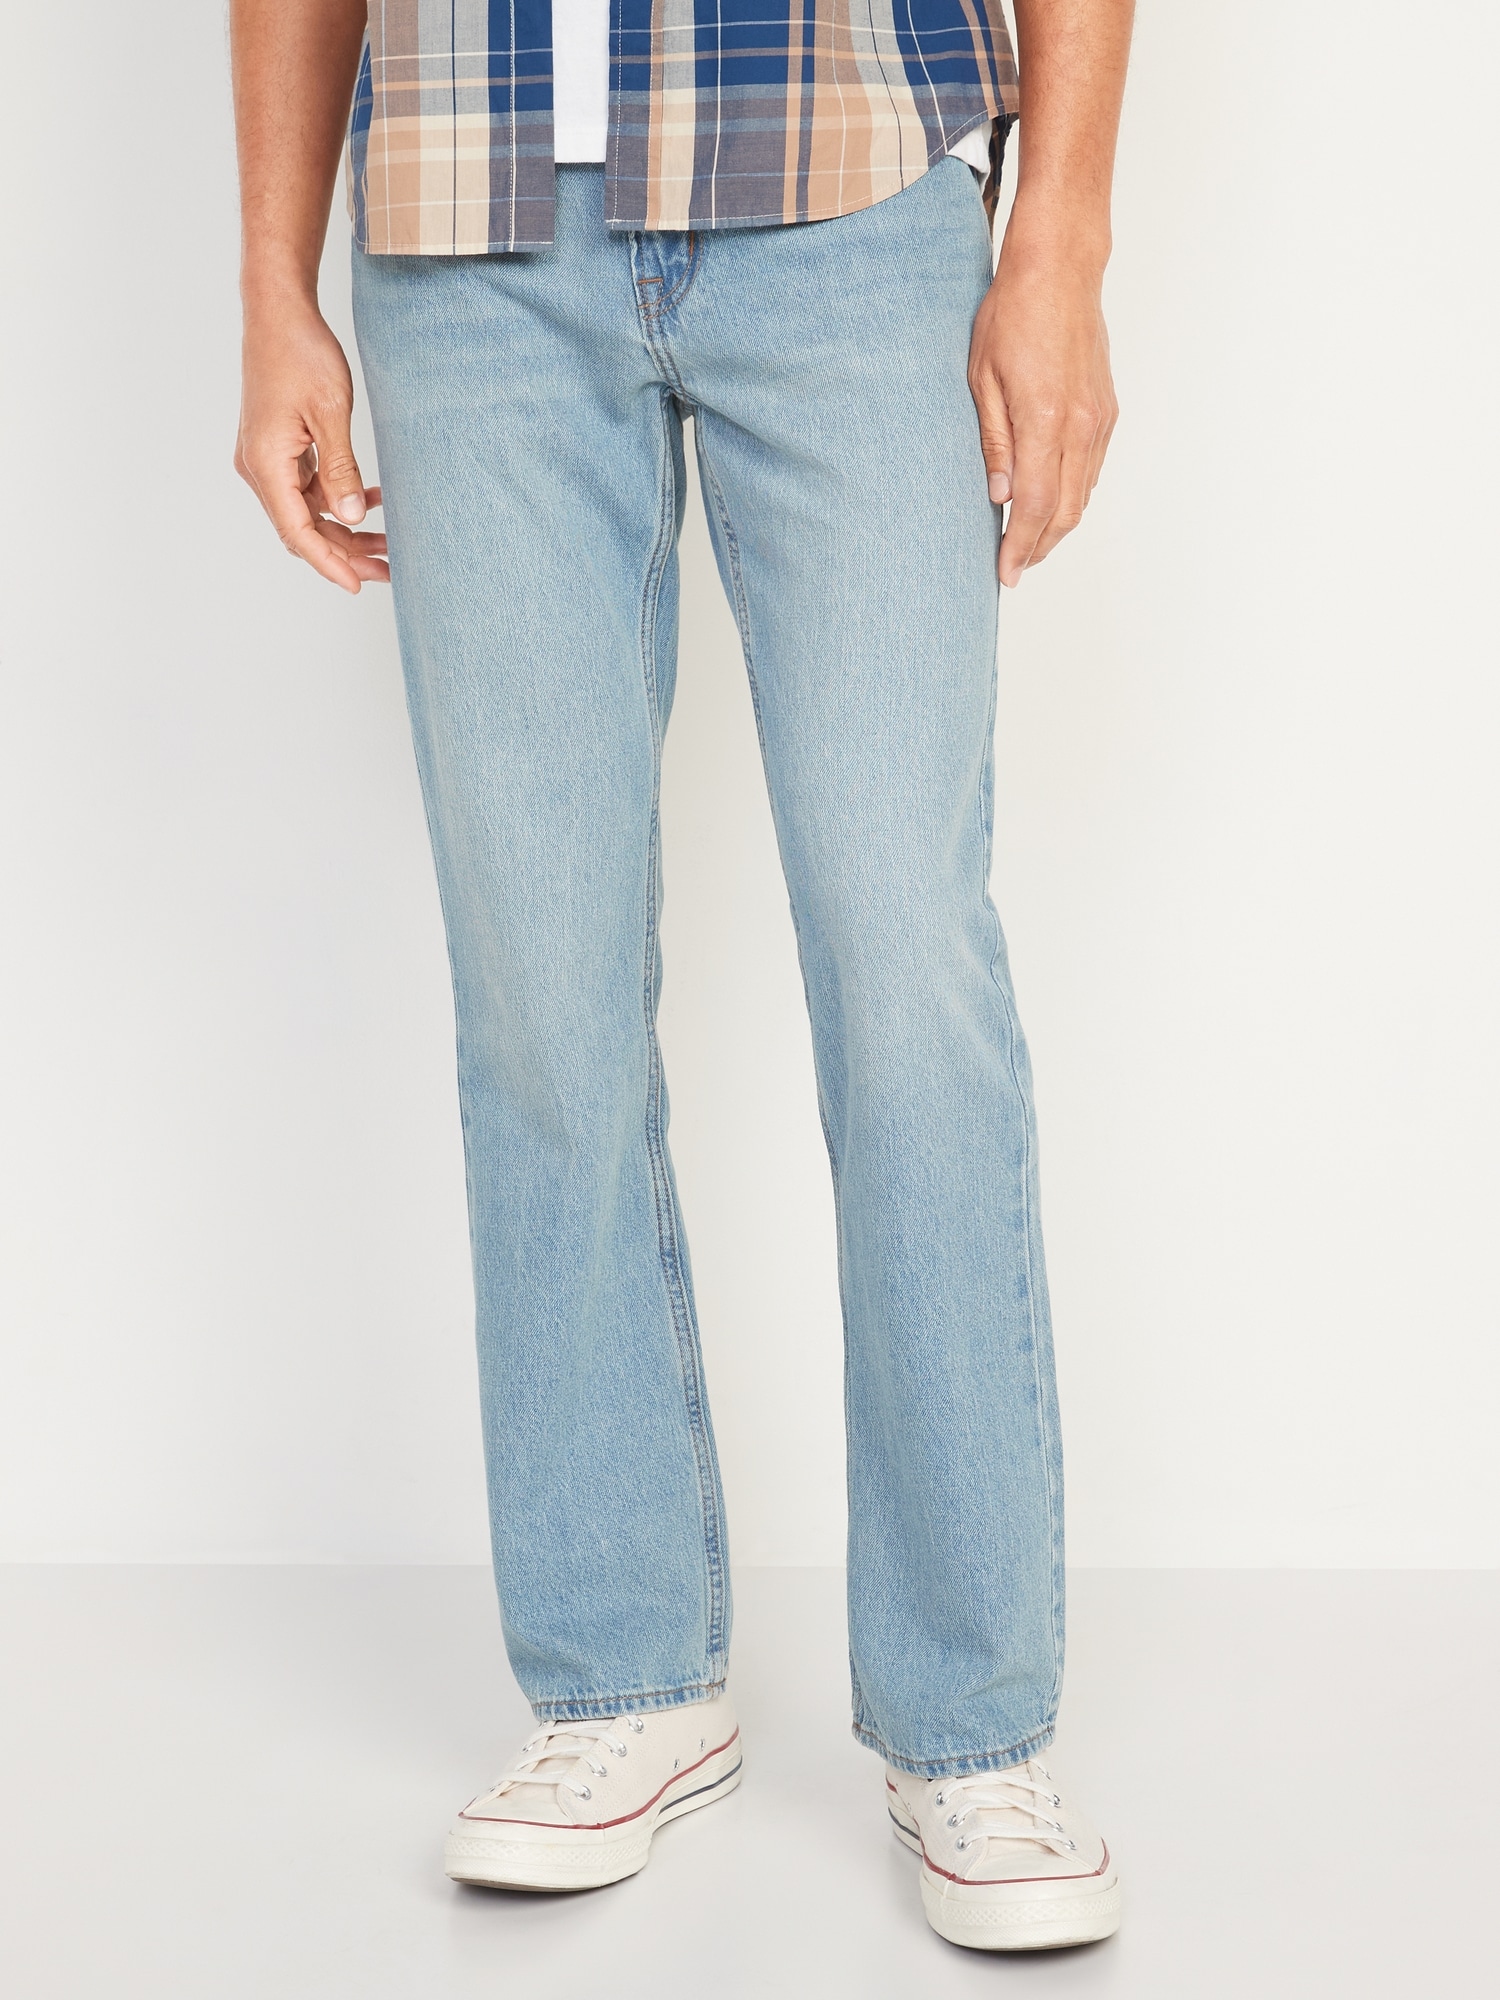 Fleece Lined Jeans at Rs 2299.00, Ahmedabad